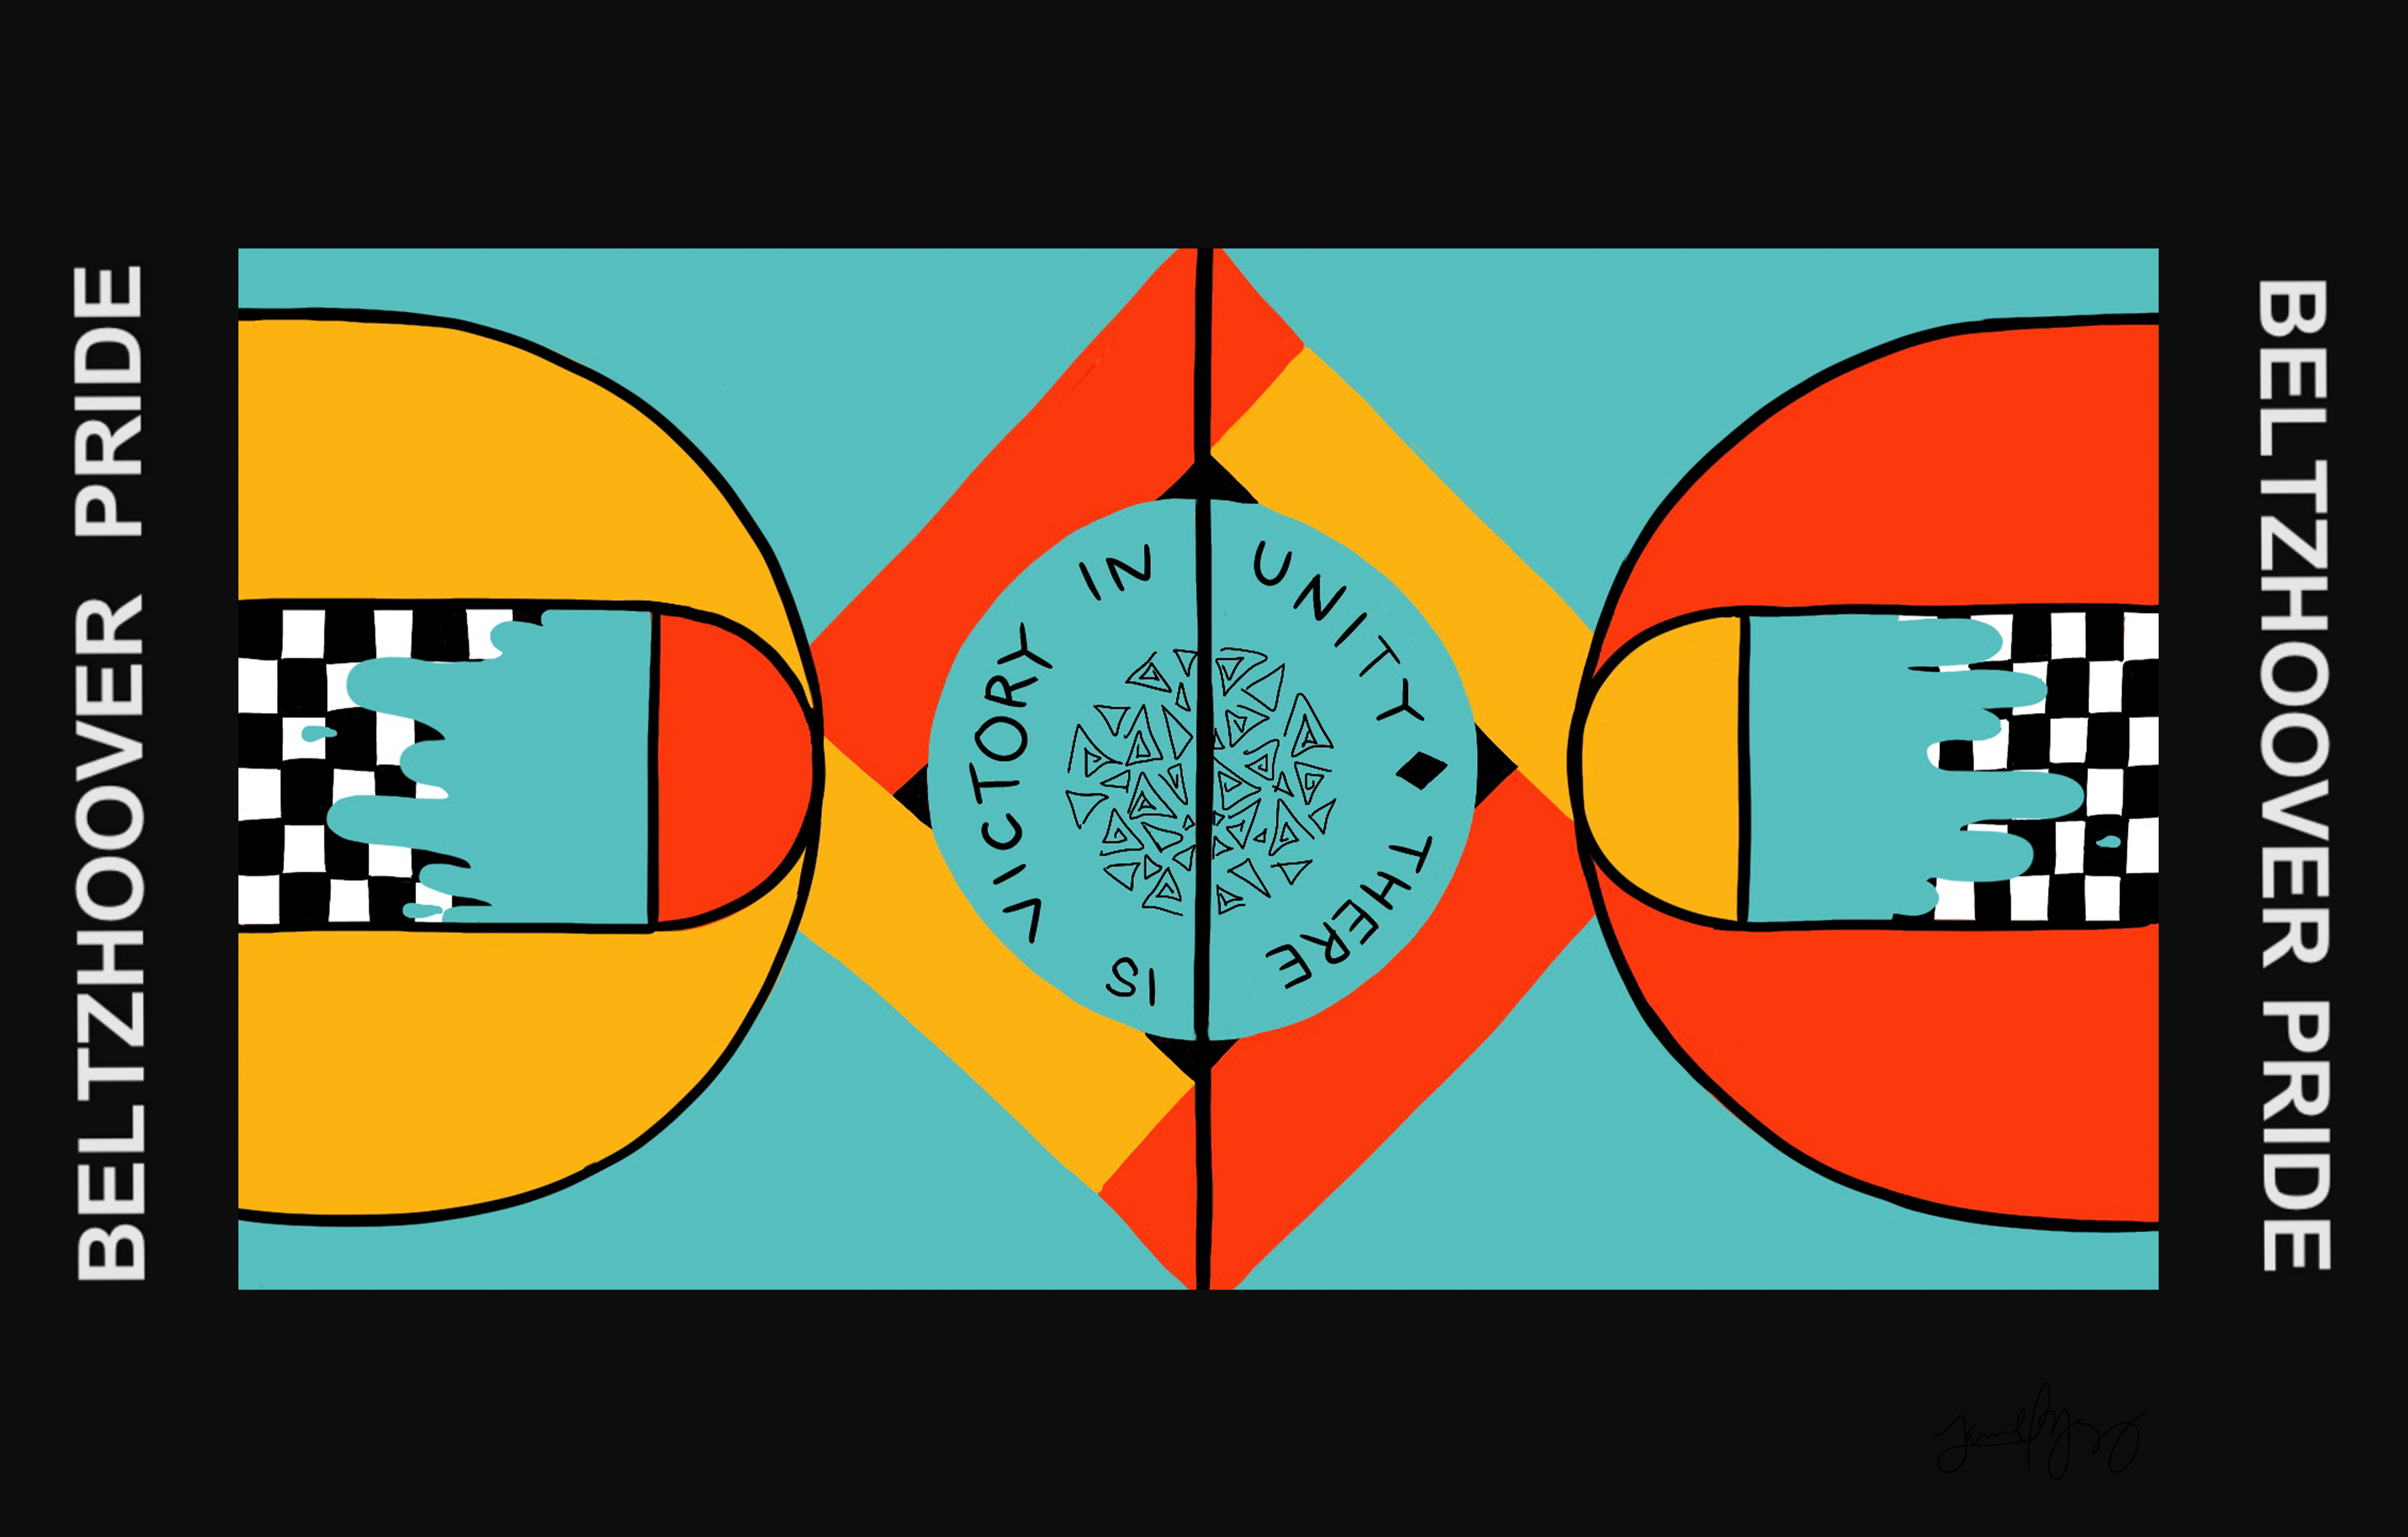 Home Court Advantage design by Janel Young